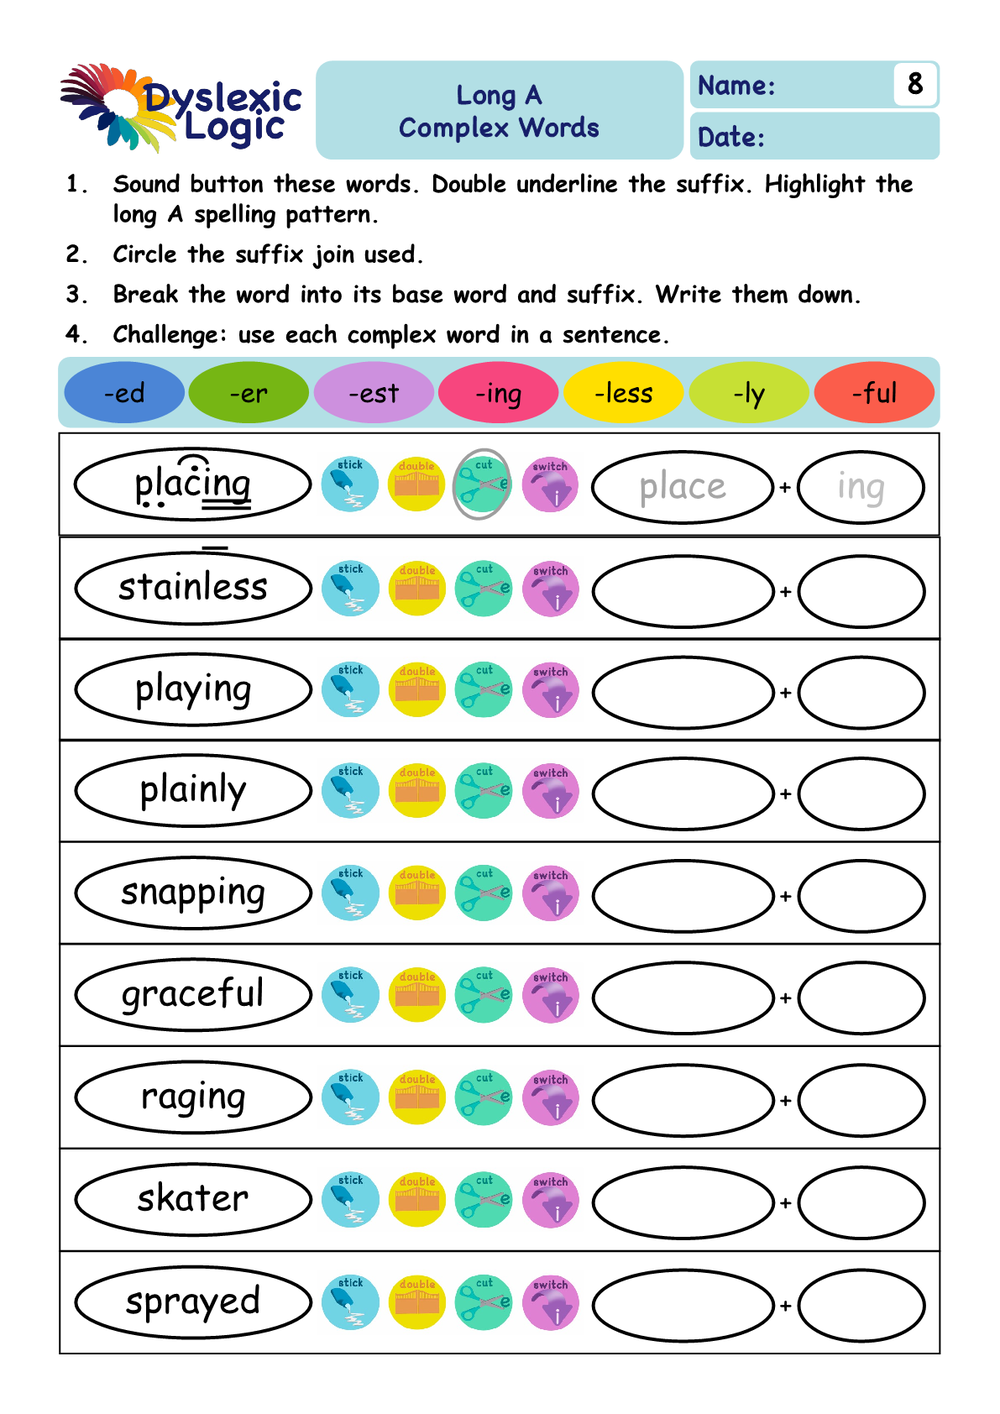 printable phonics support resources dyslexic logic - free printable ...